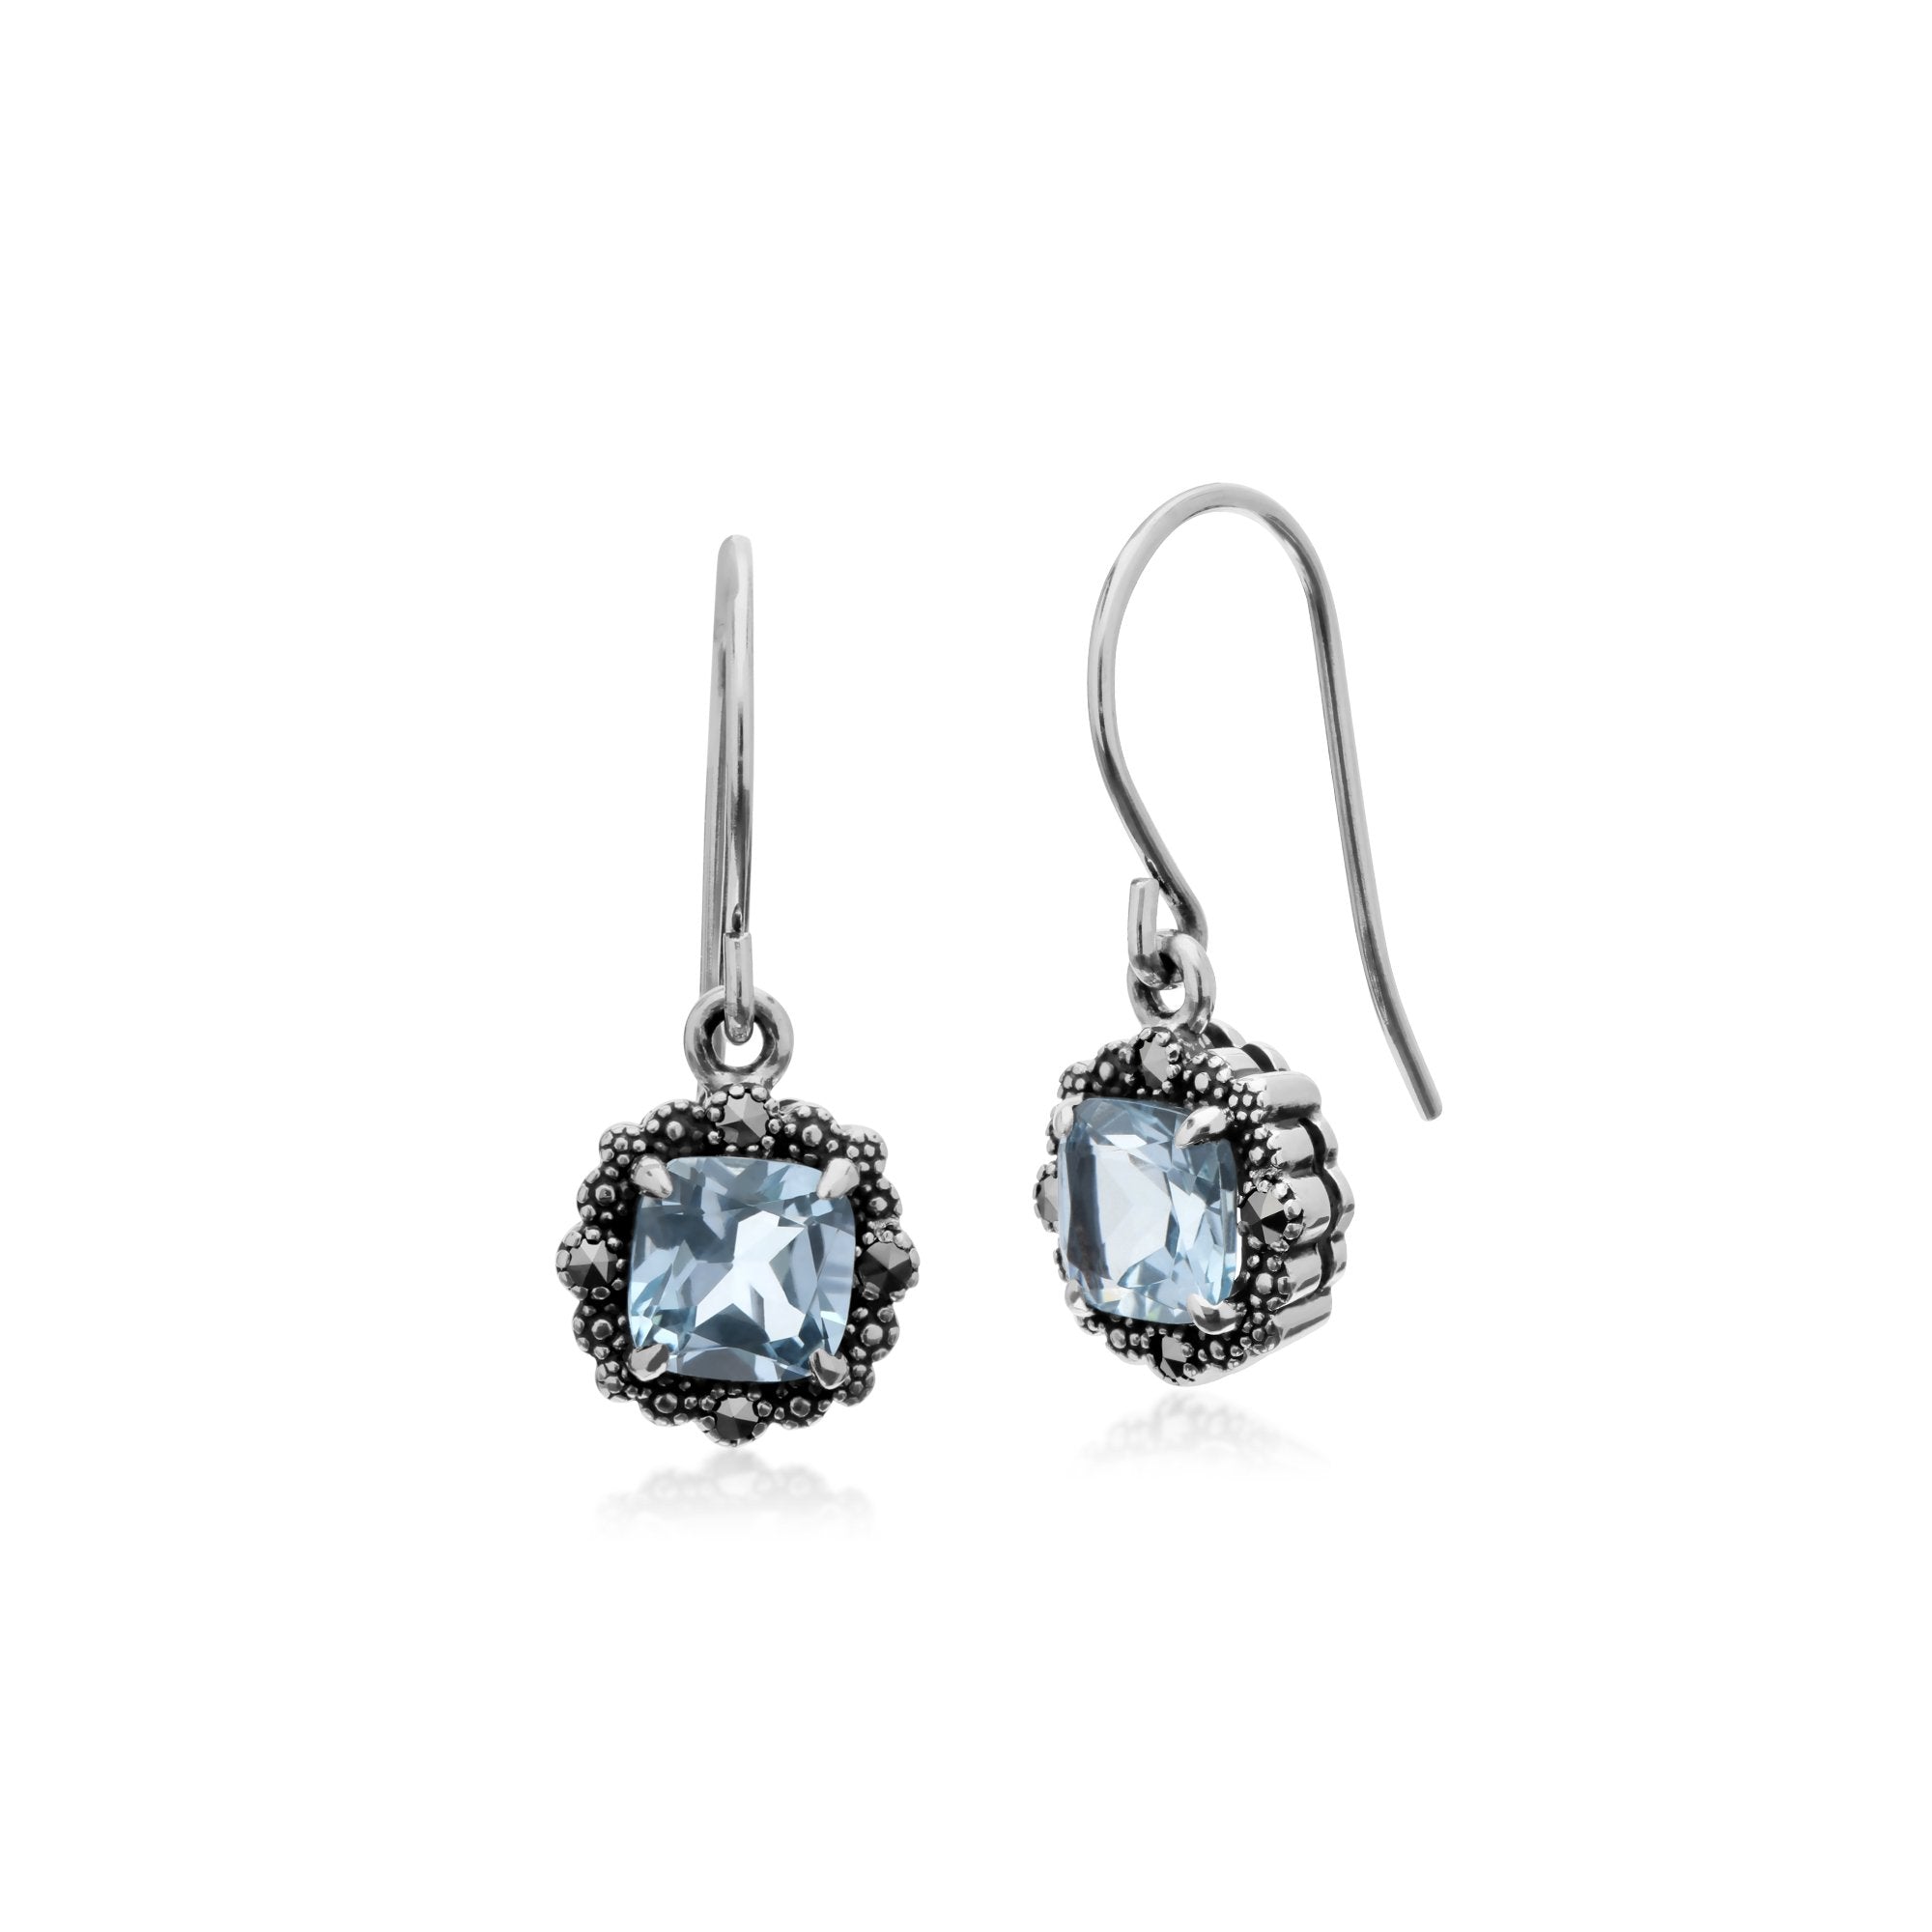 Art Deco Style Square Cushion Blue Topaz & Marcasite Drop Earrings in 925 Sterling Silver